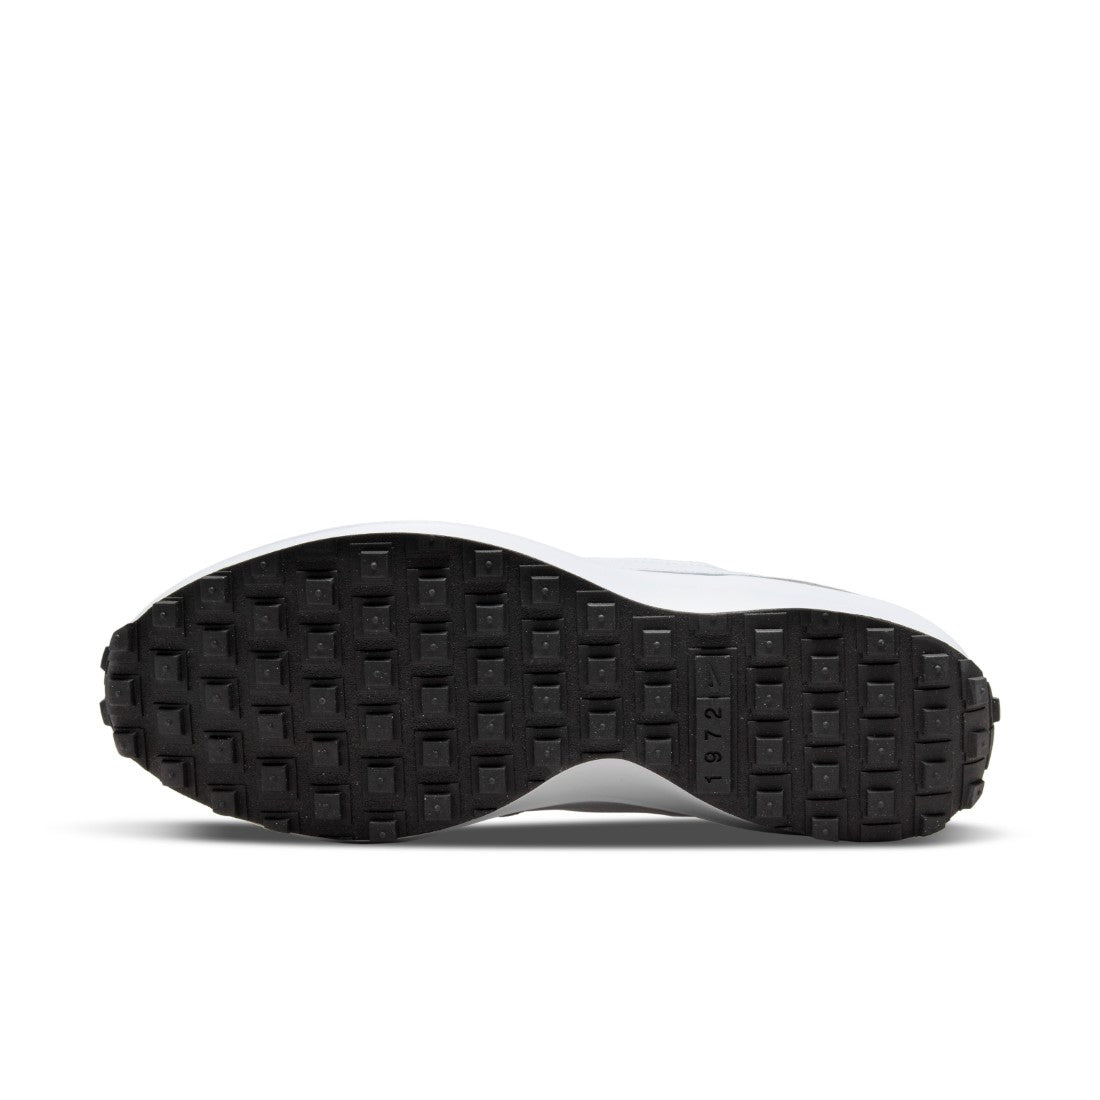 Waffle Debut Lifestyle shoes